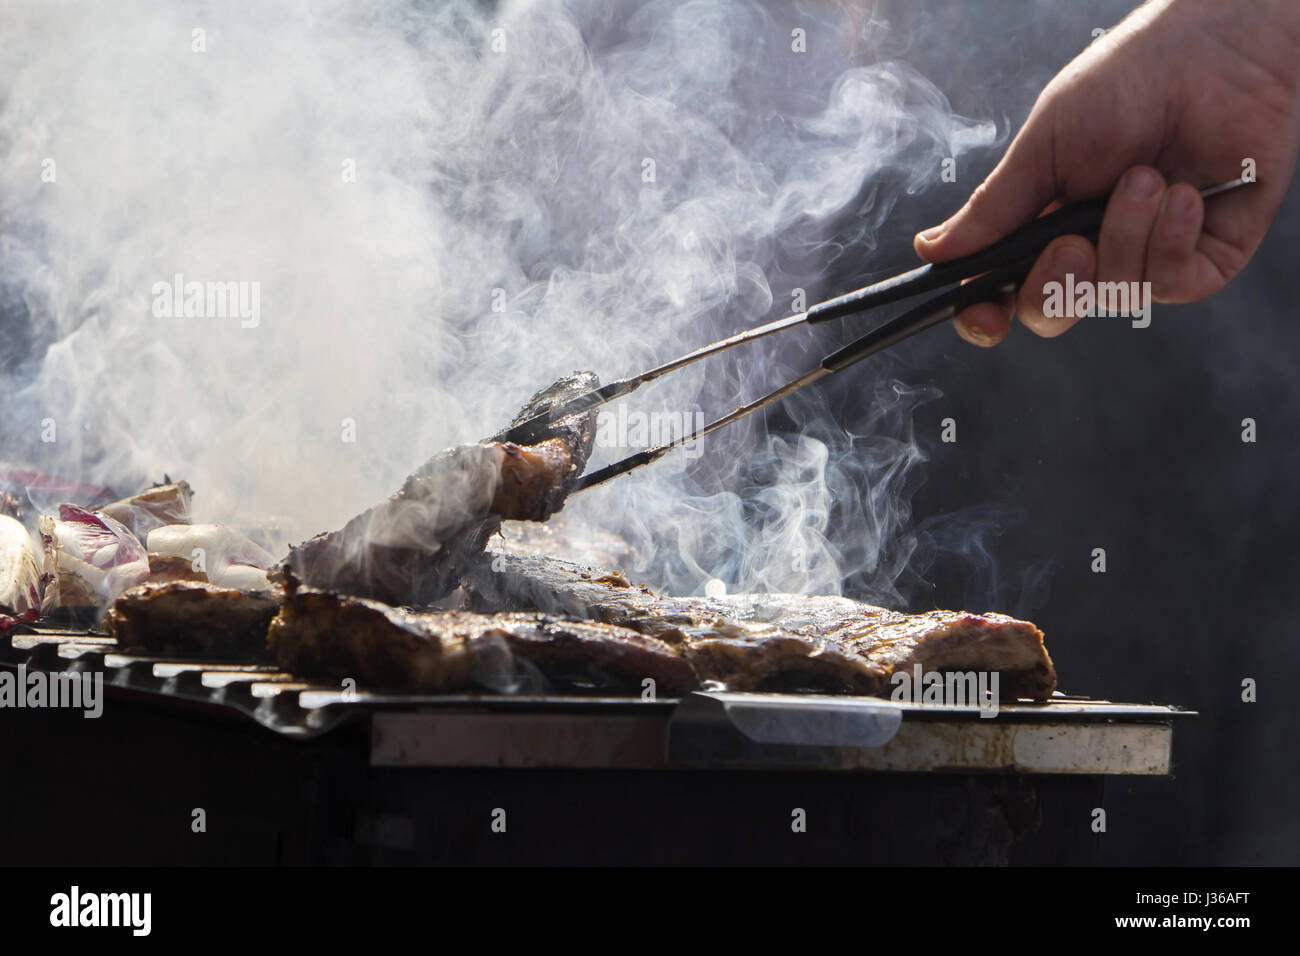 Grilled pork ribs and red chicory on the grill Stock Photo